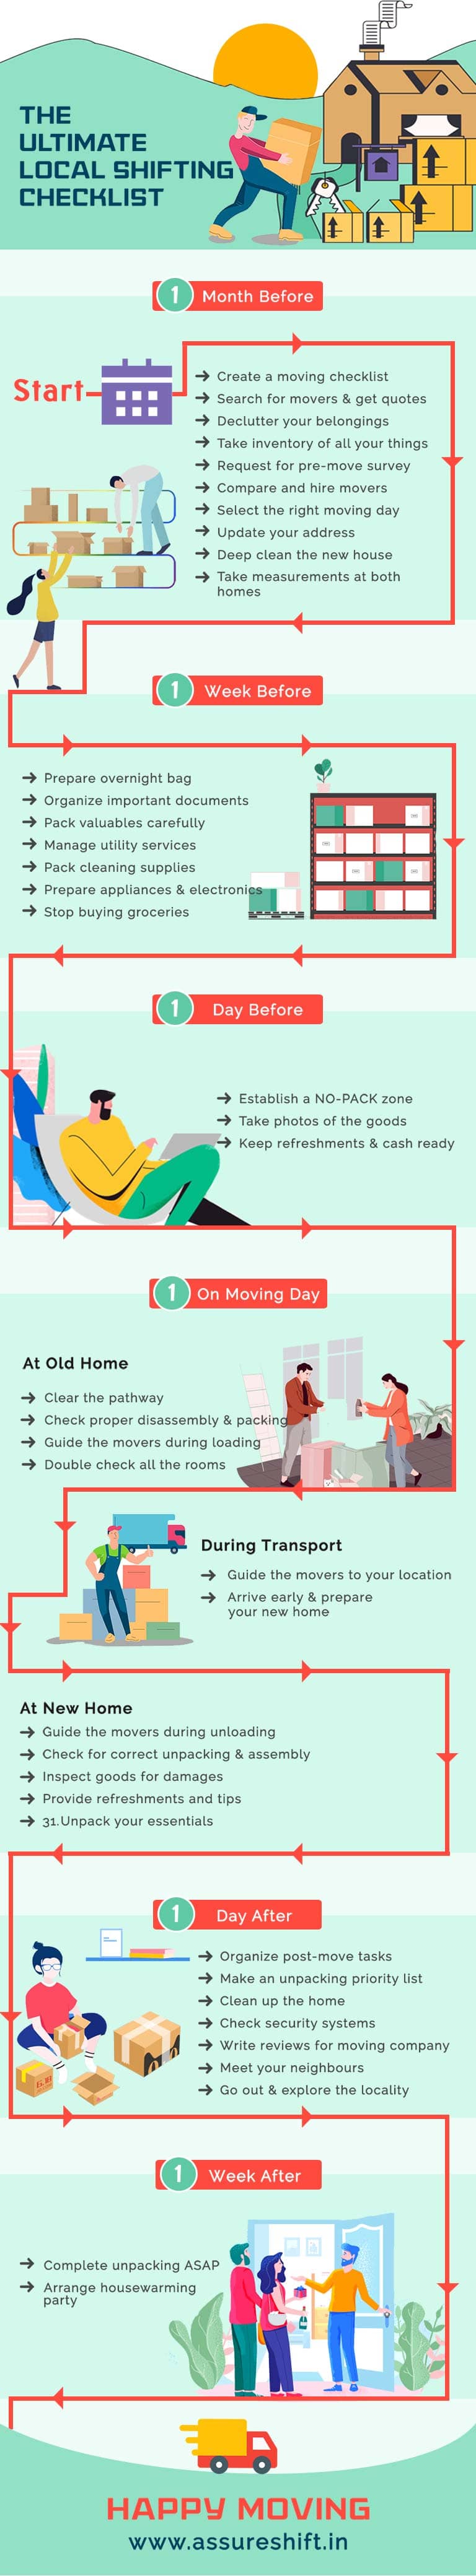 https://www.assureshift.in/sites/default/files/images/content-images/ultimate-house-shifting-checklist-infography.jpg